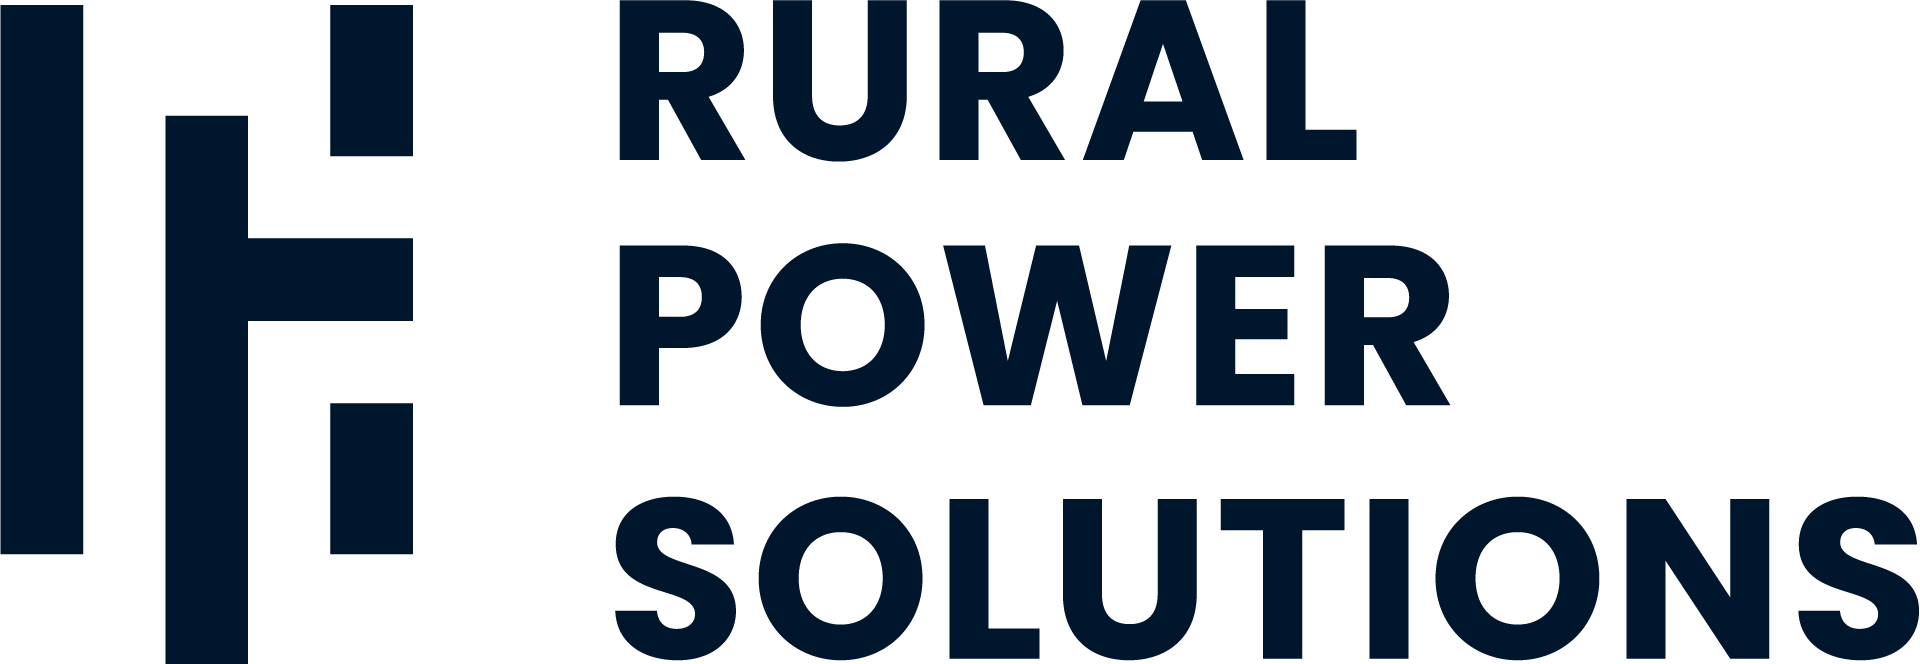 Rural Power Solutions